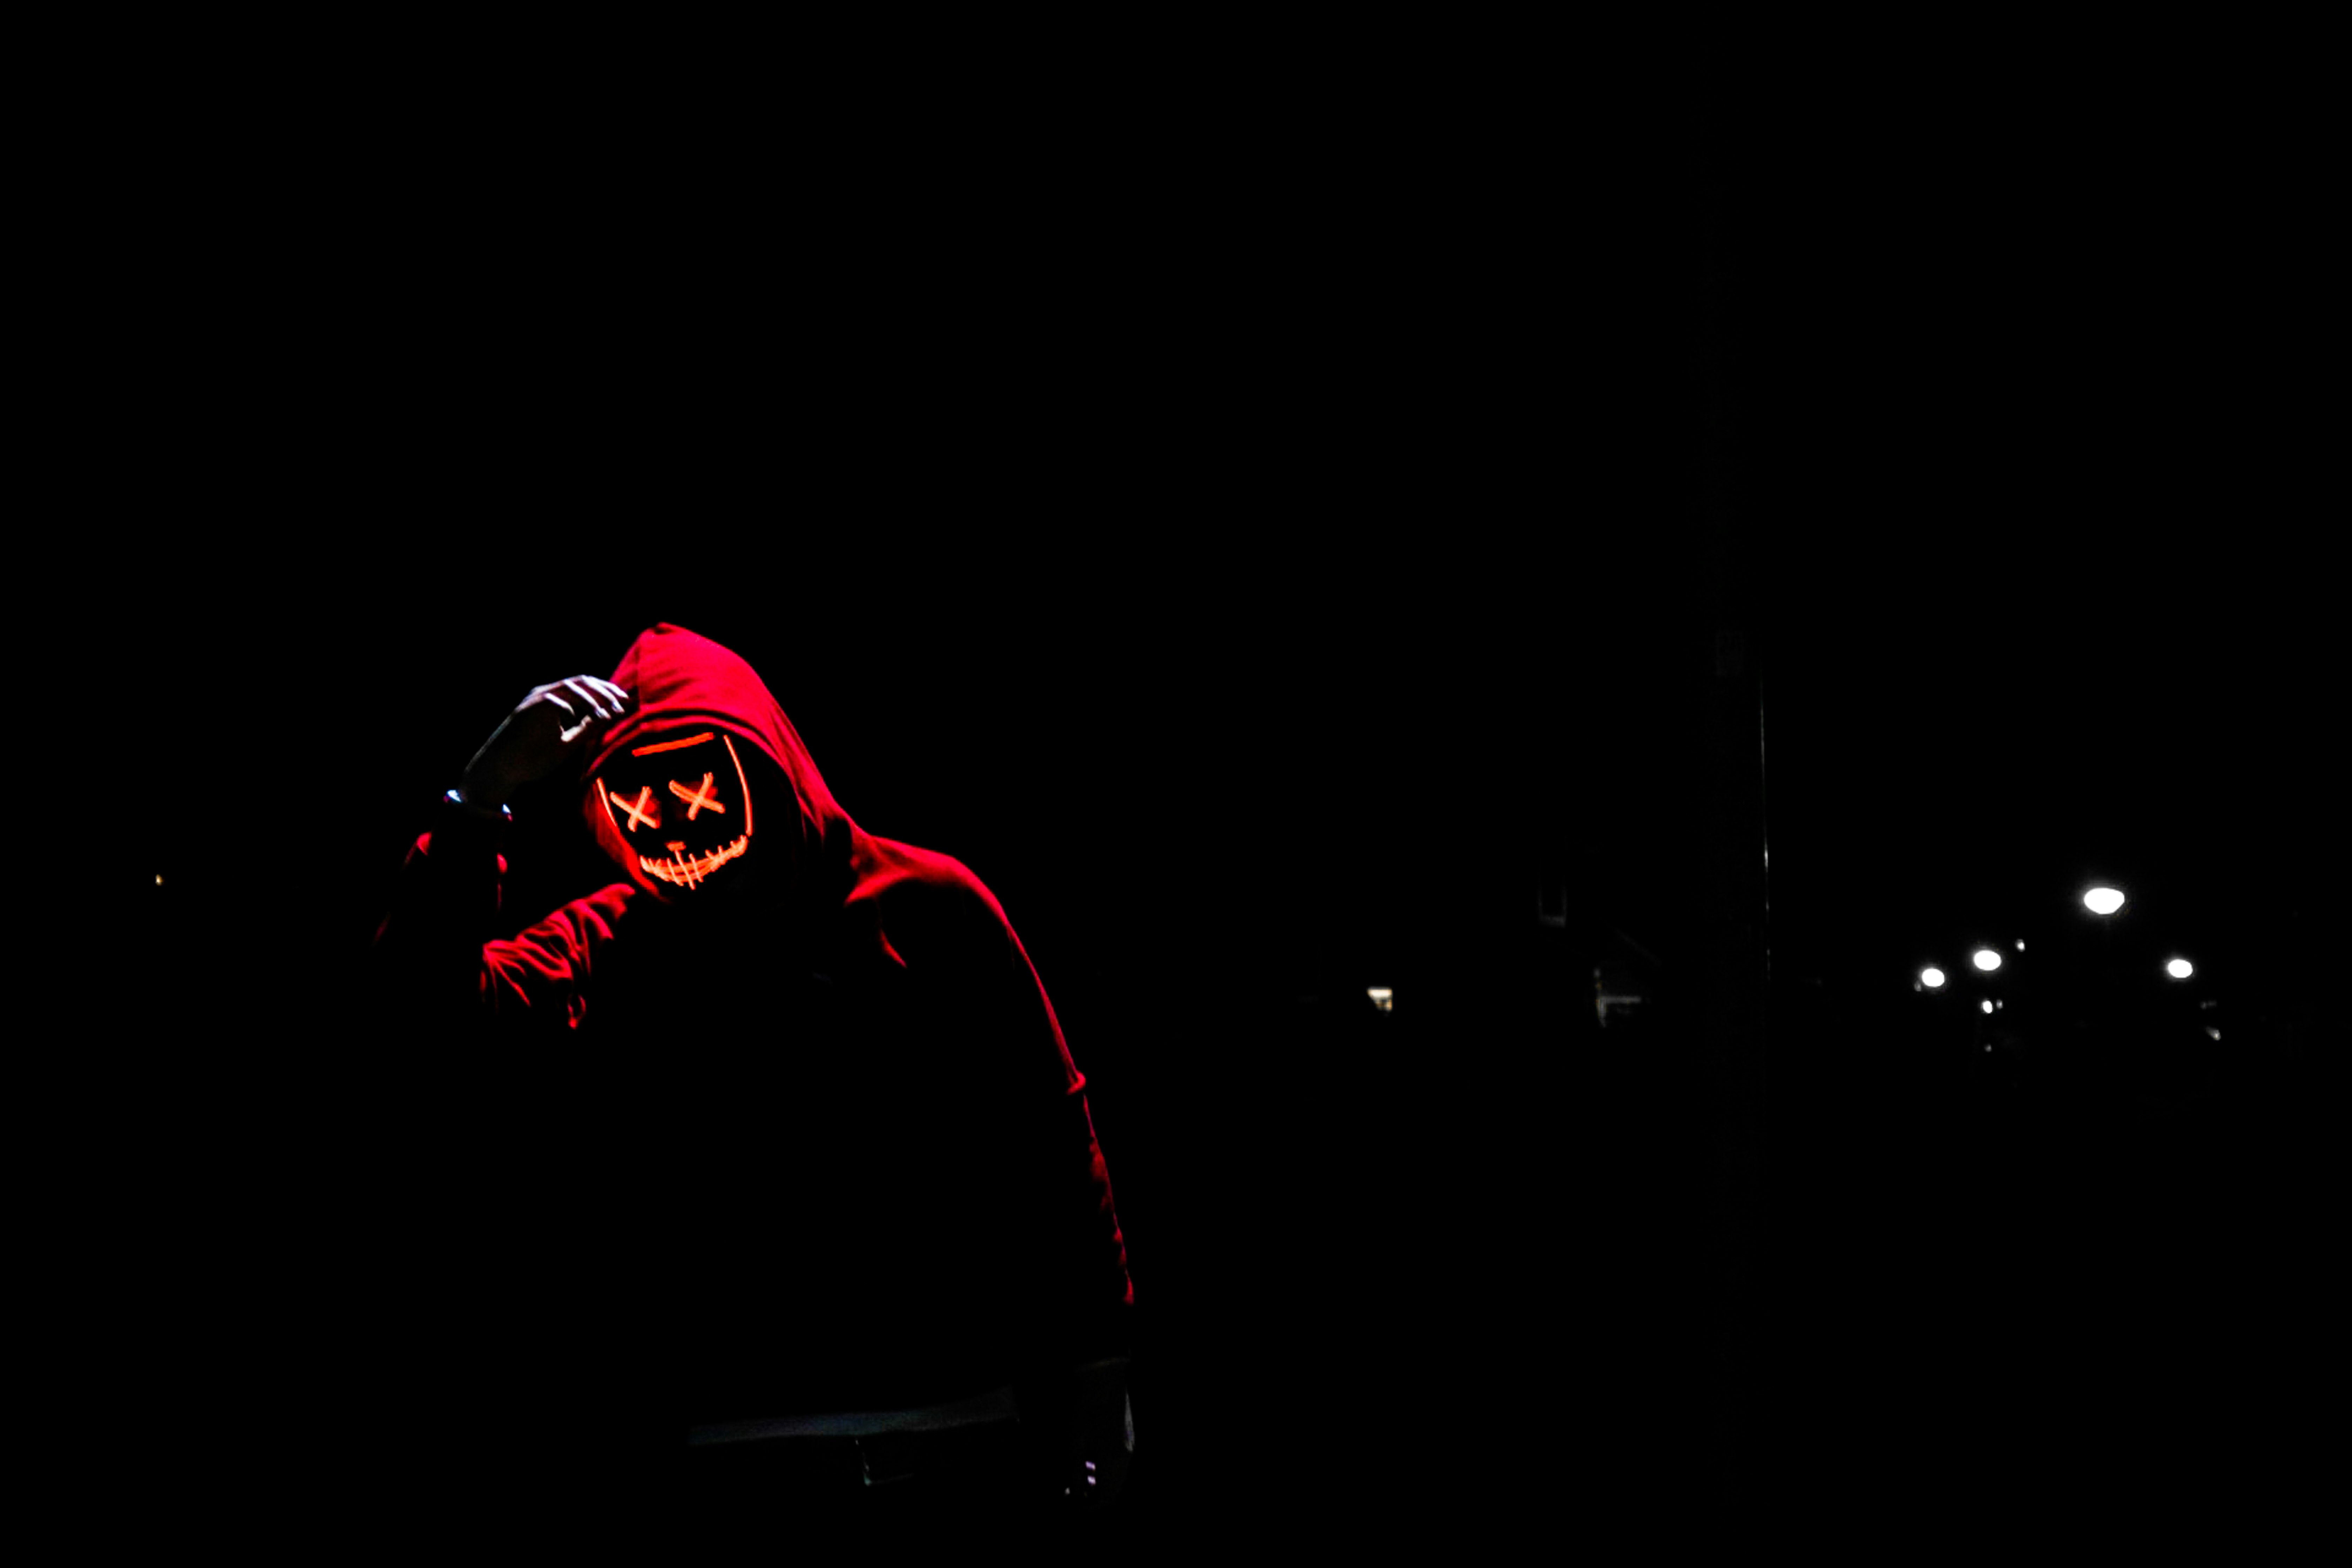 silhouette of person at night time